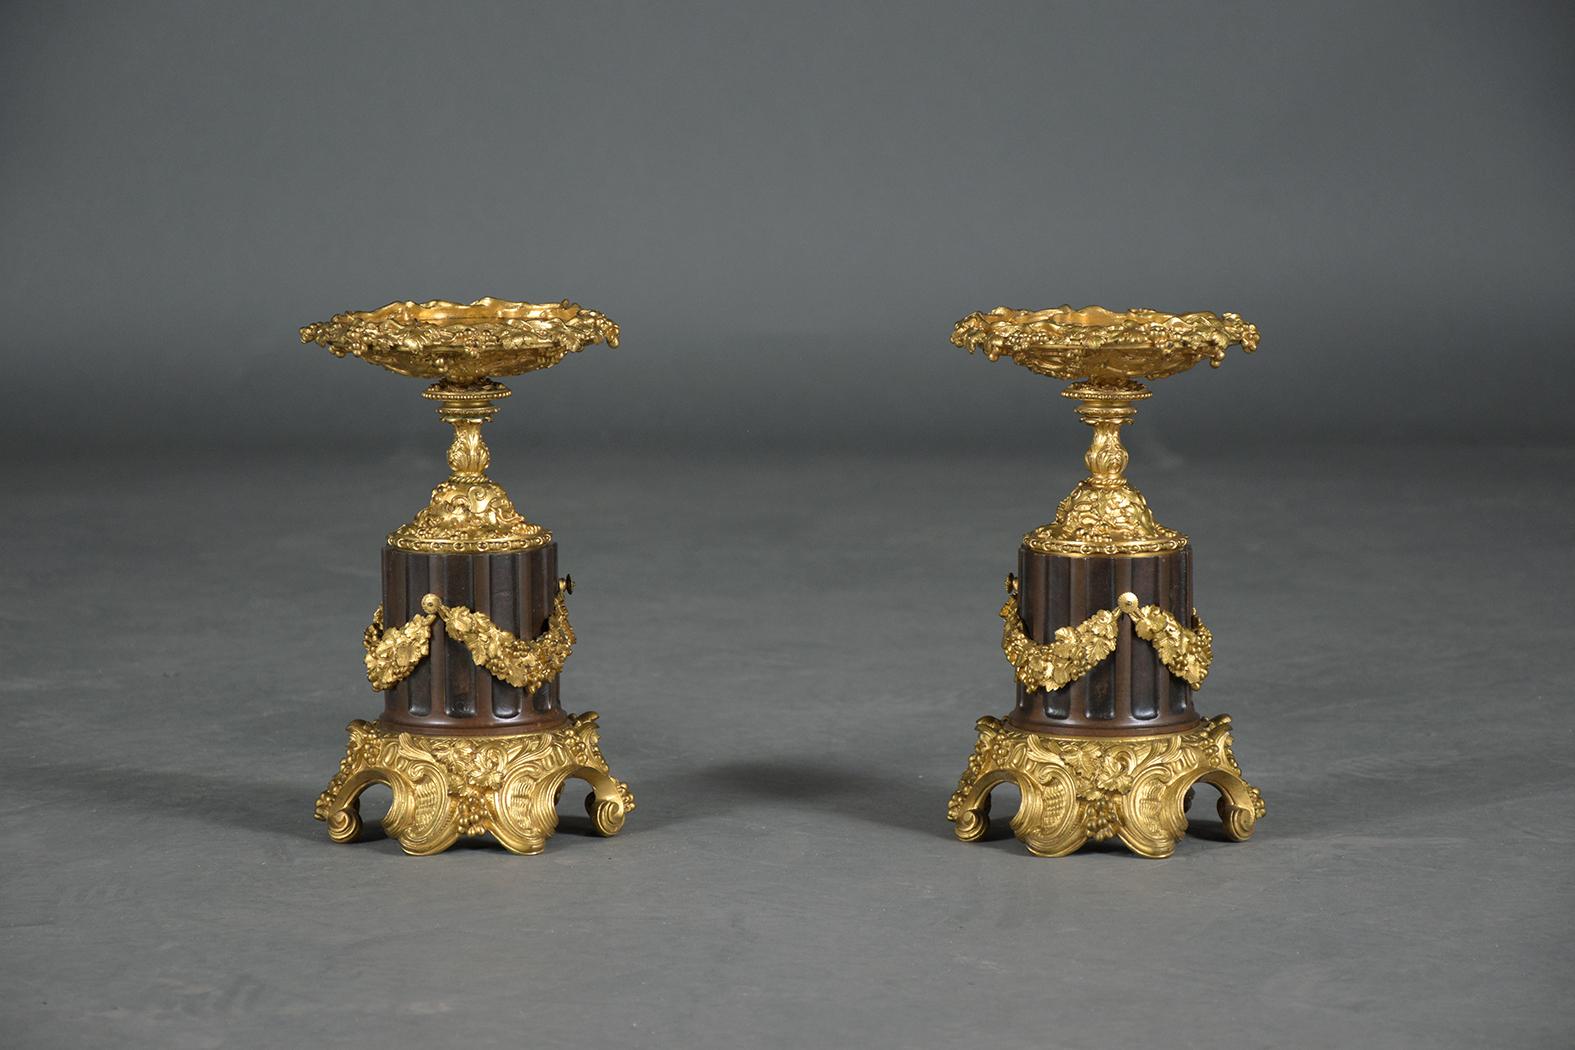 Empire Early 19th-Century French Bronzed Urns with Gold-Plated Garland Decoration For Sale